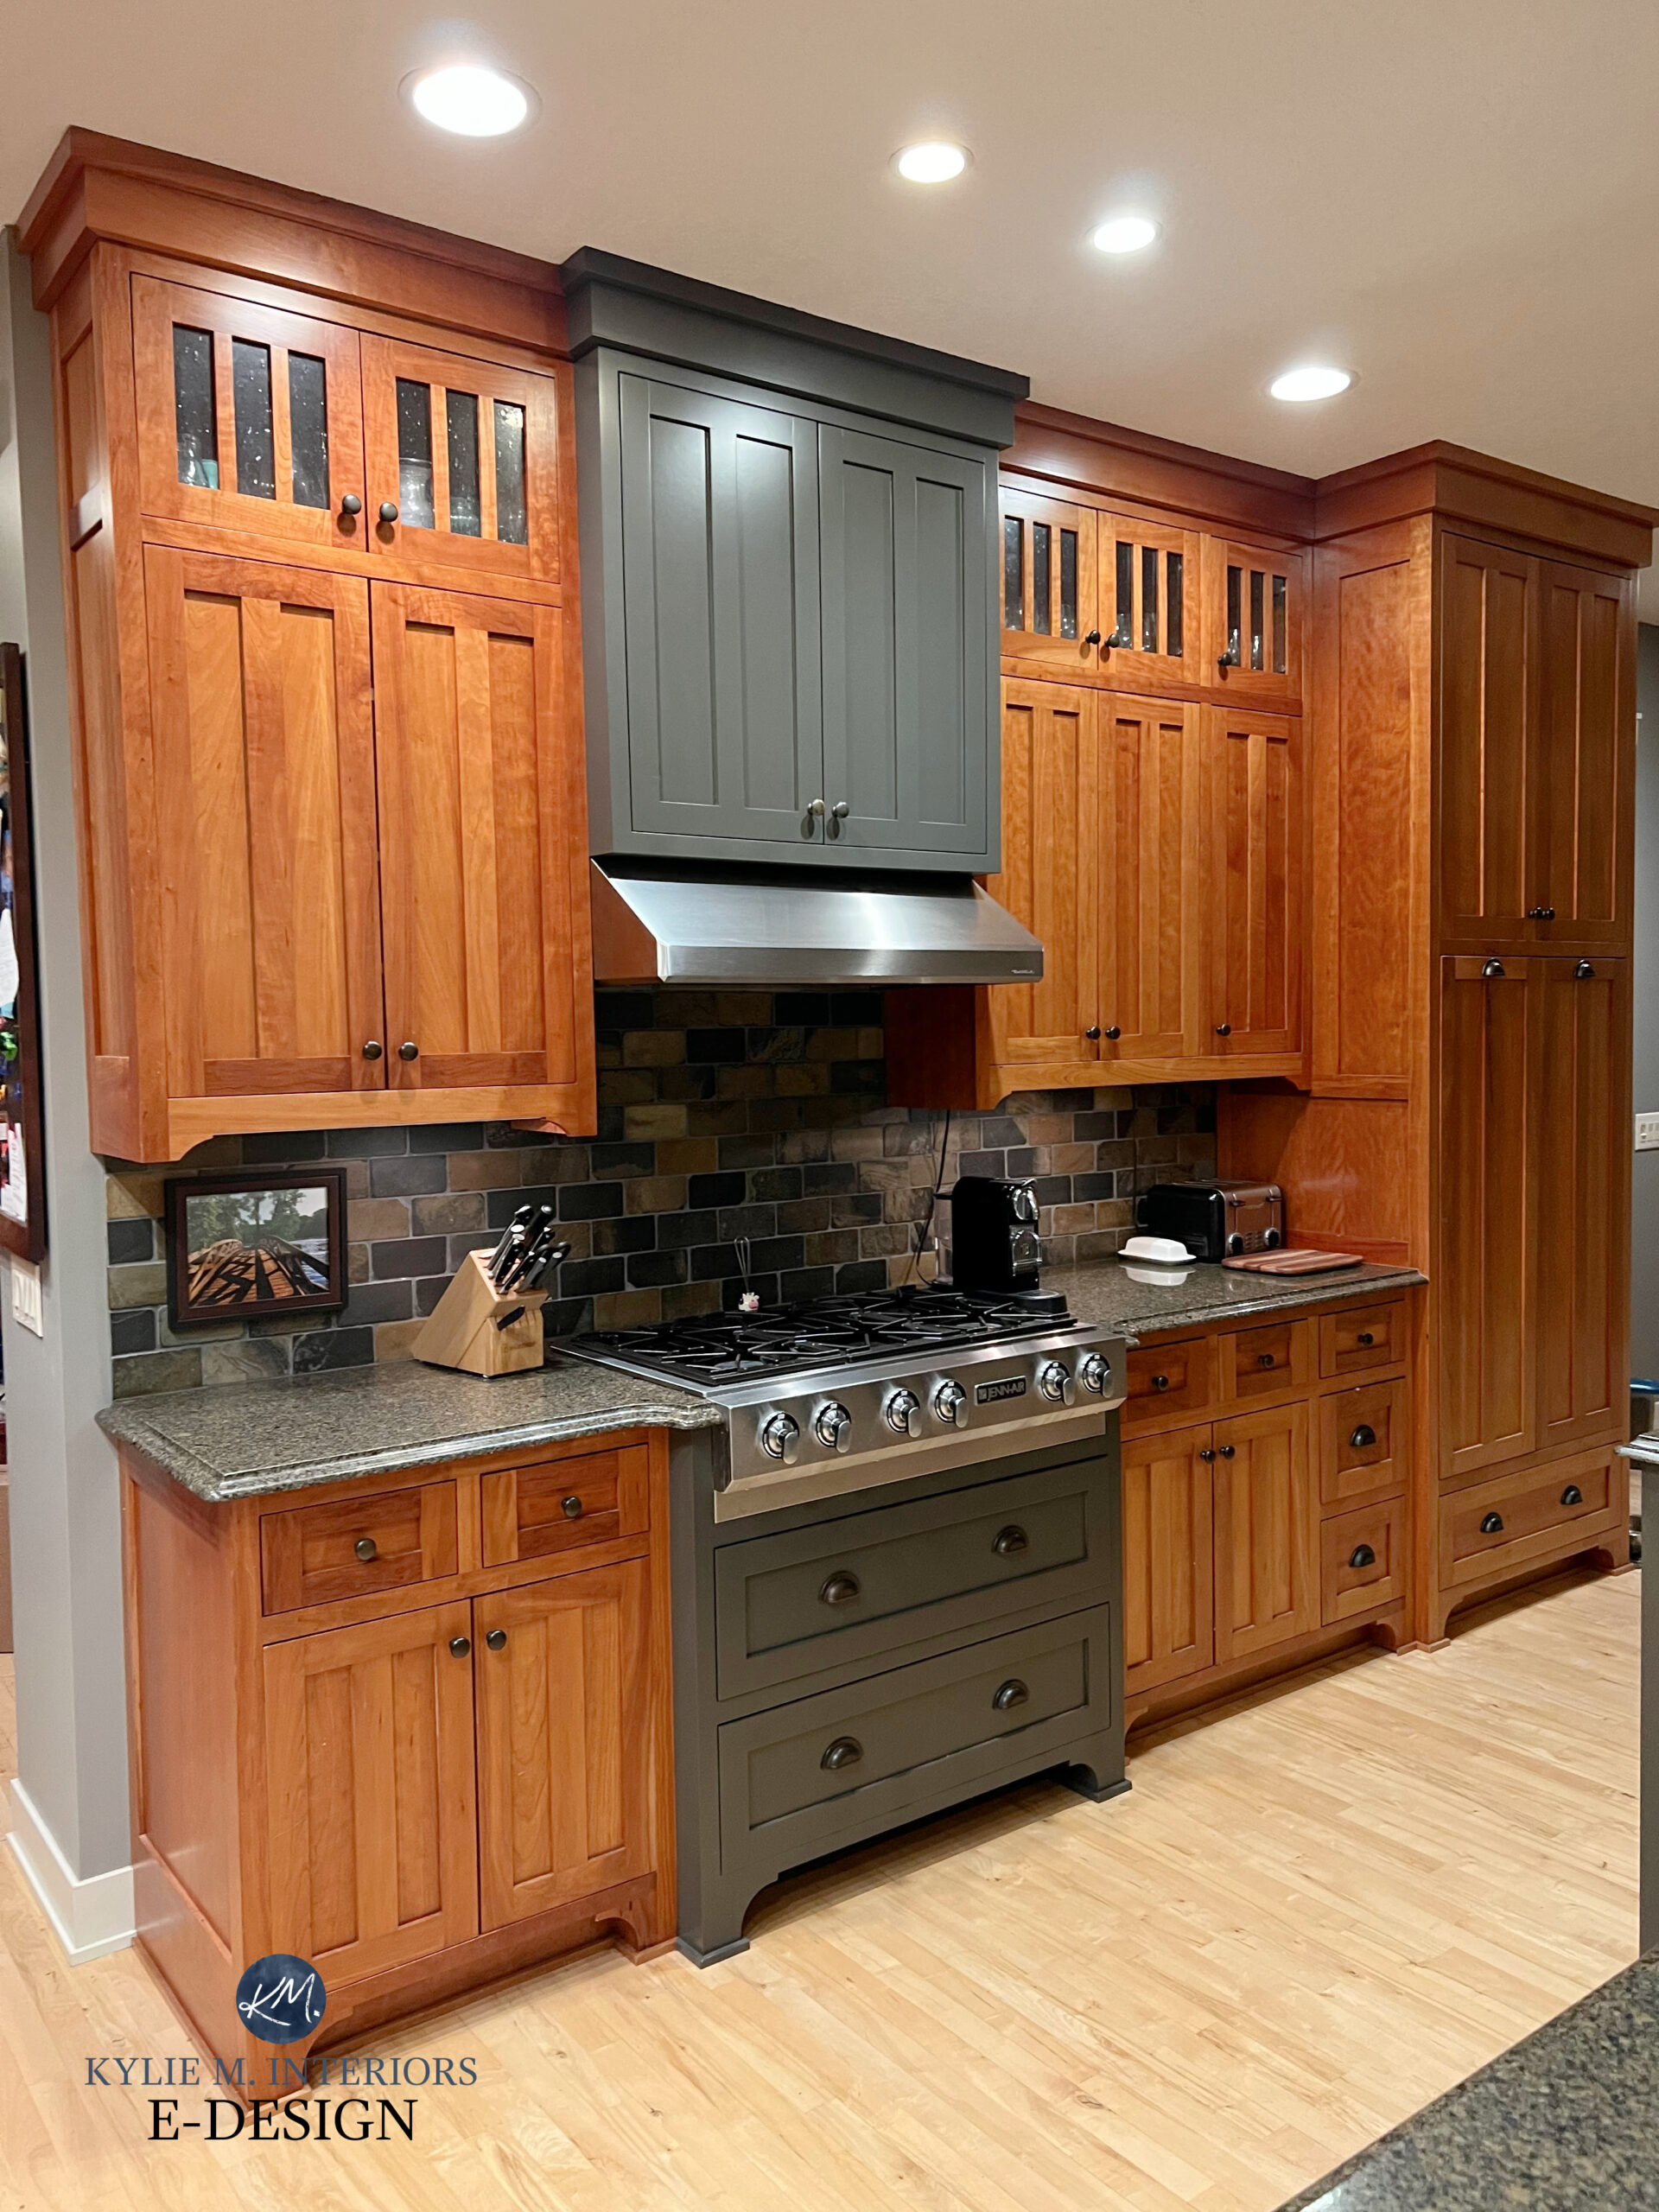 how to update oak or wood cabinets without a drop of paint (part 2